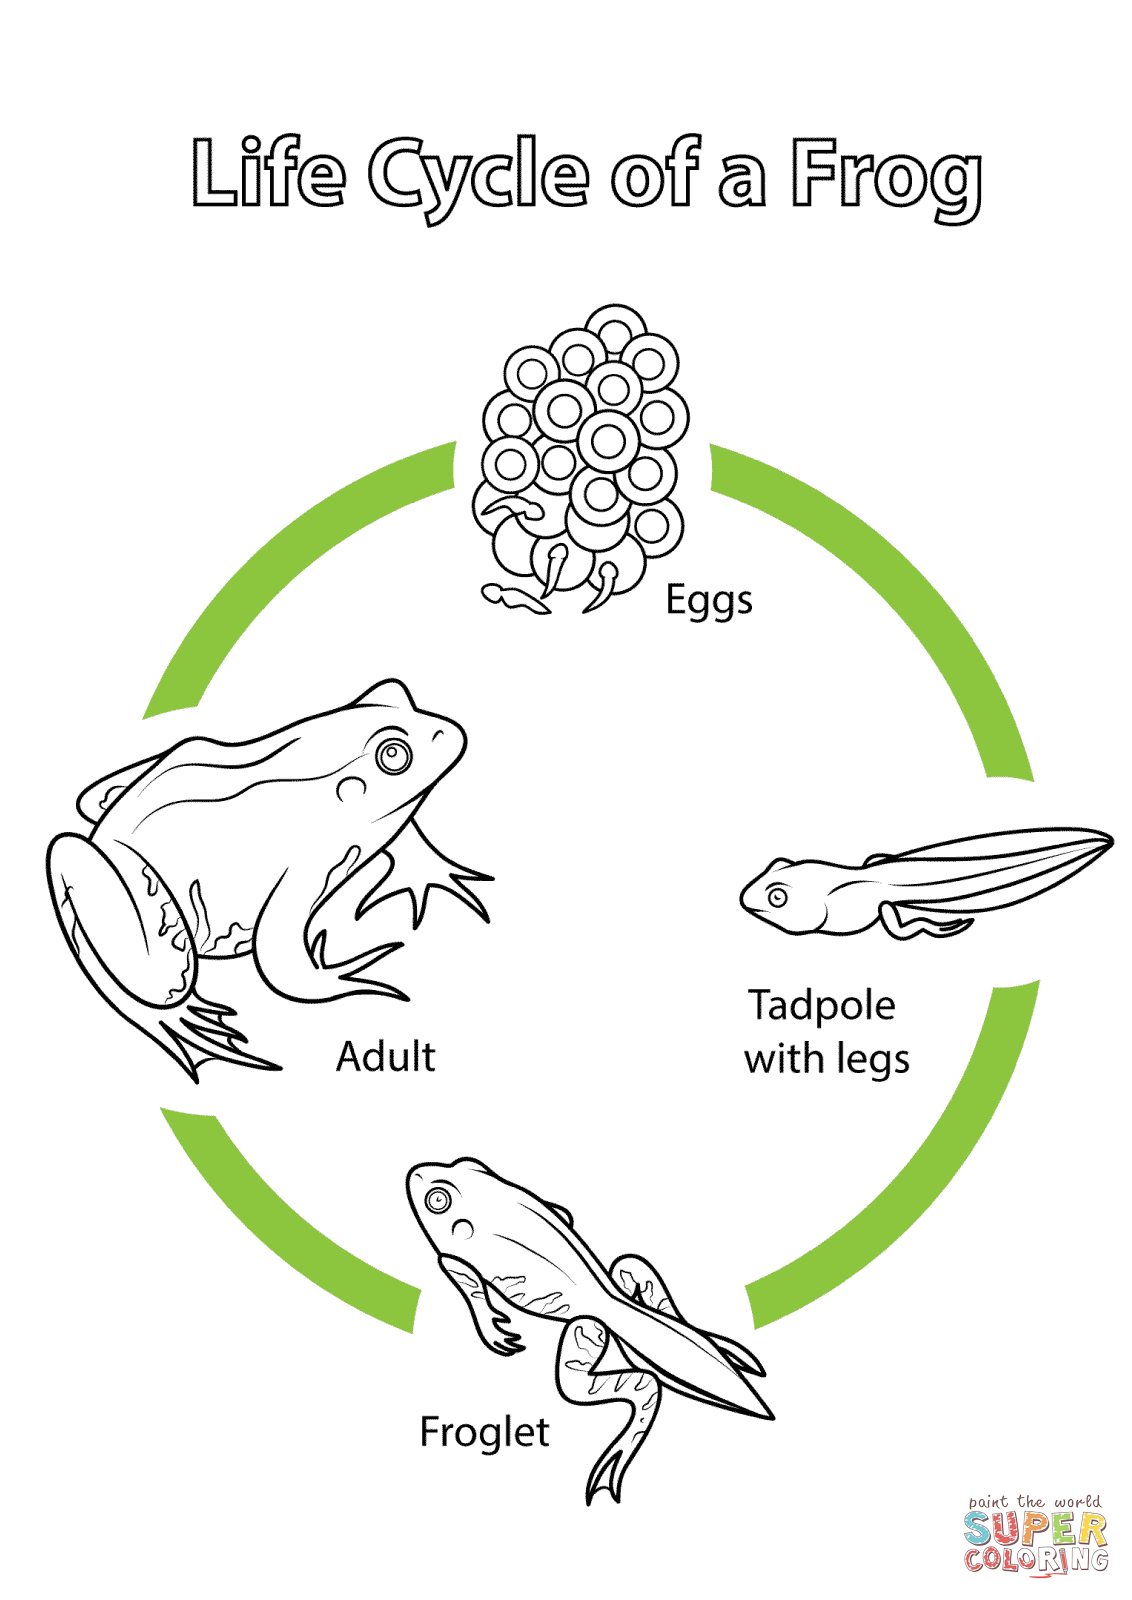 Life Cycle Of A Frog Coloring Page | Free Printable Coloring Pages - Life Cycle Of A Frog Free Printable Book